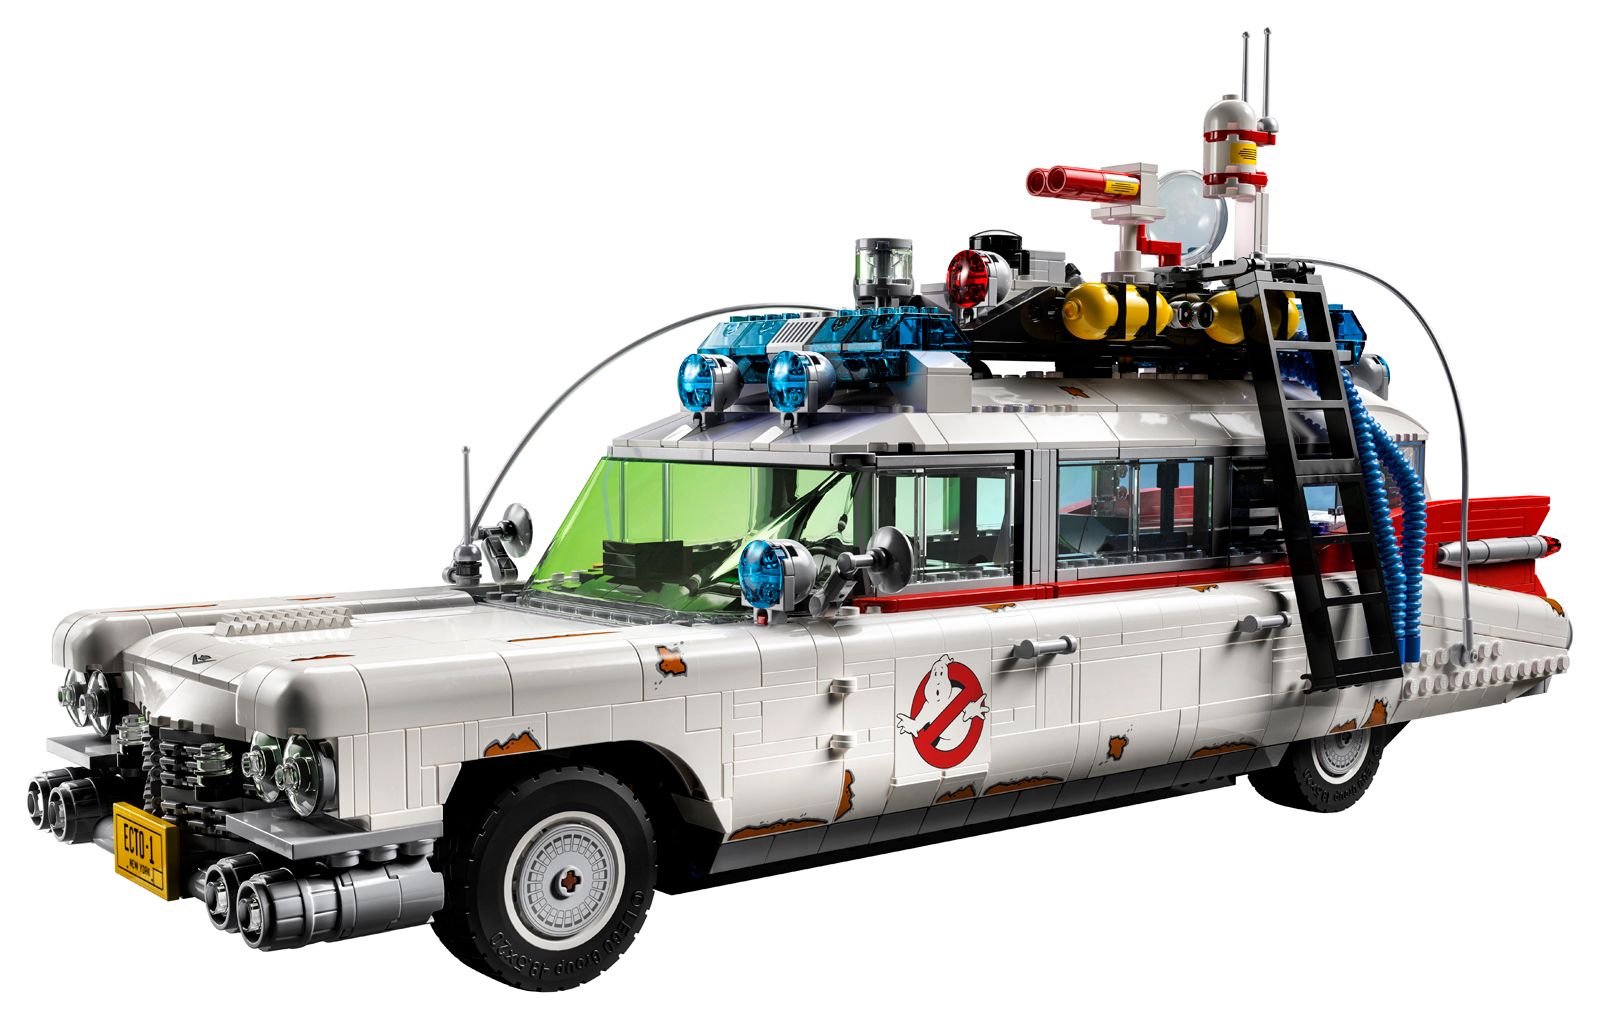 Lego's latest version of Ghostbusters' Ecto-1 is the most detailed yet photo 2